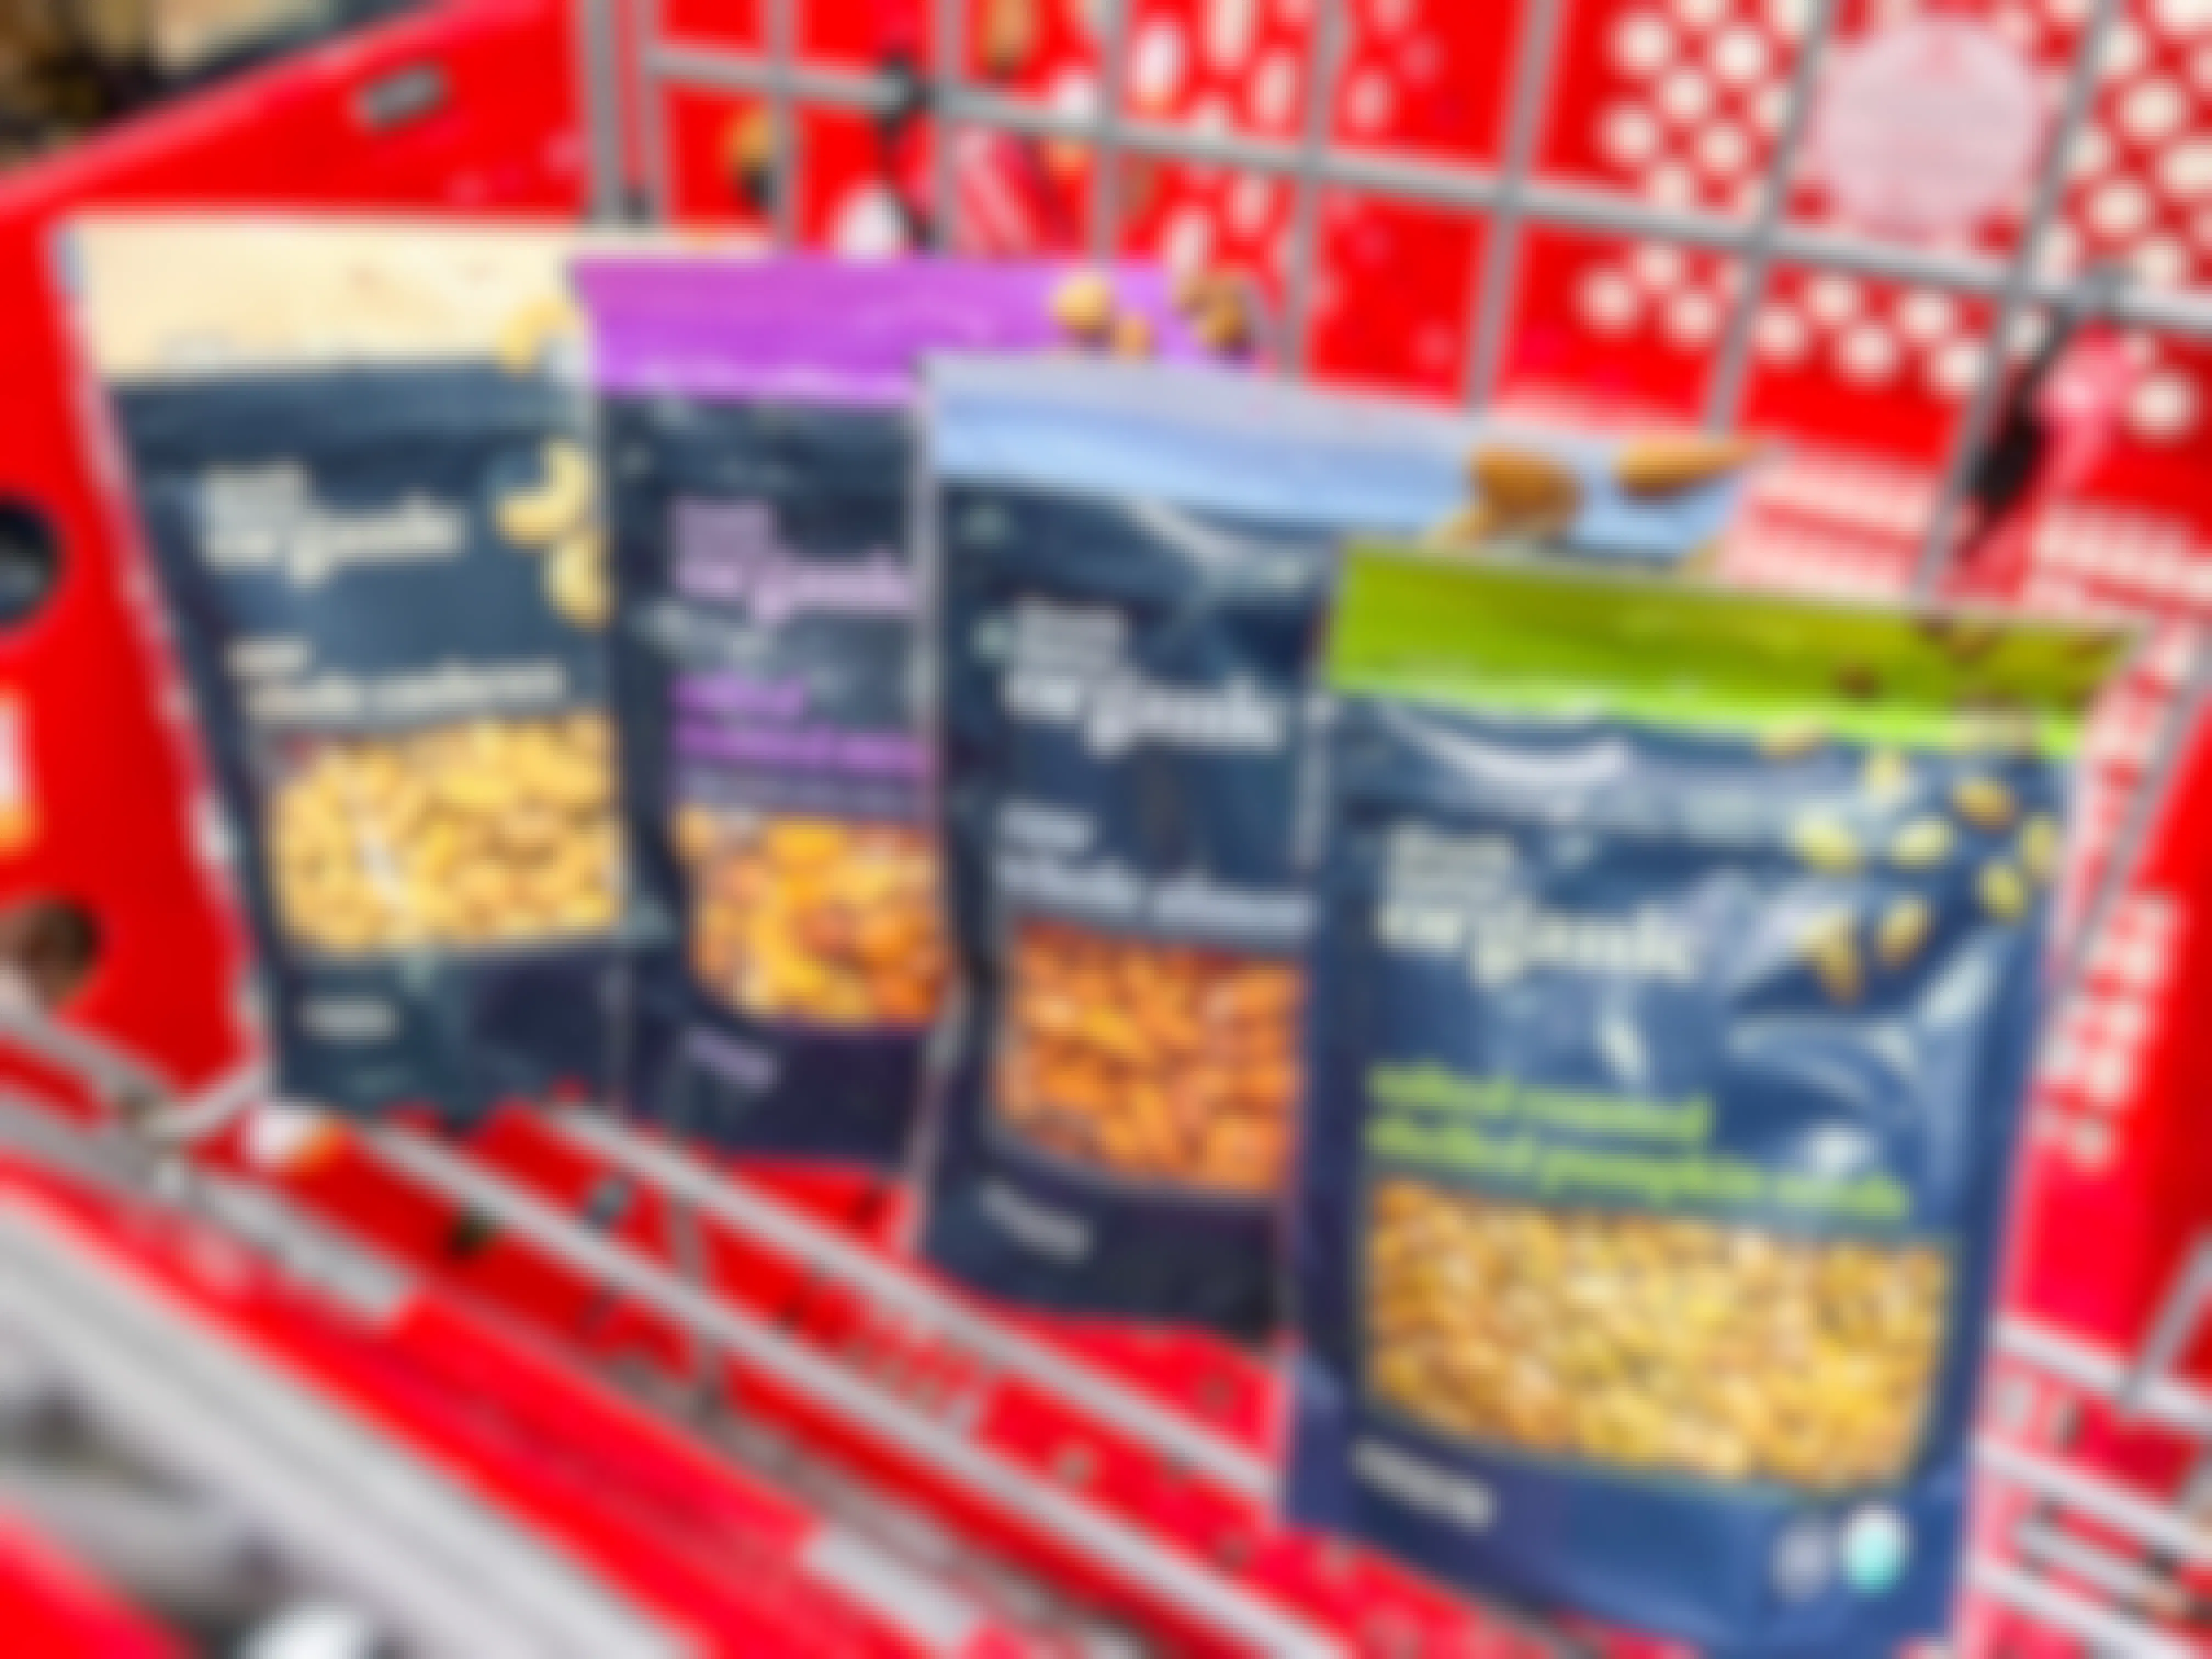 four bags of various nuts from Good & Gather in a target shopping cart